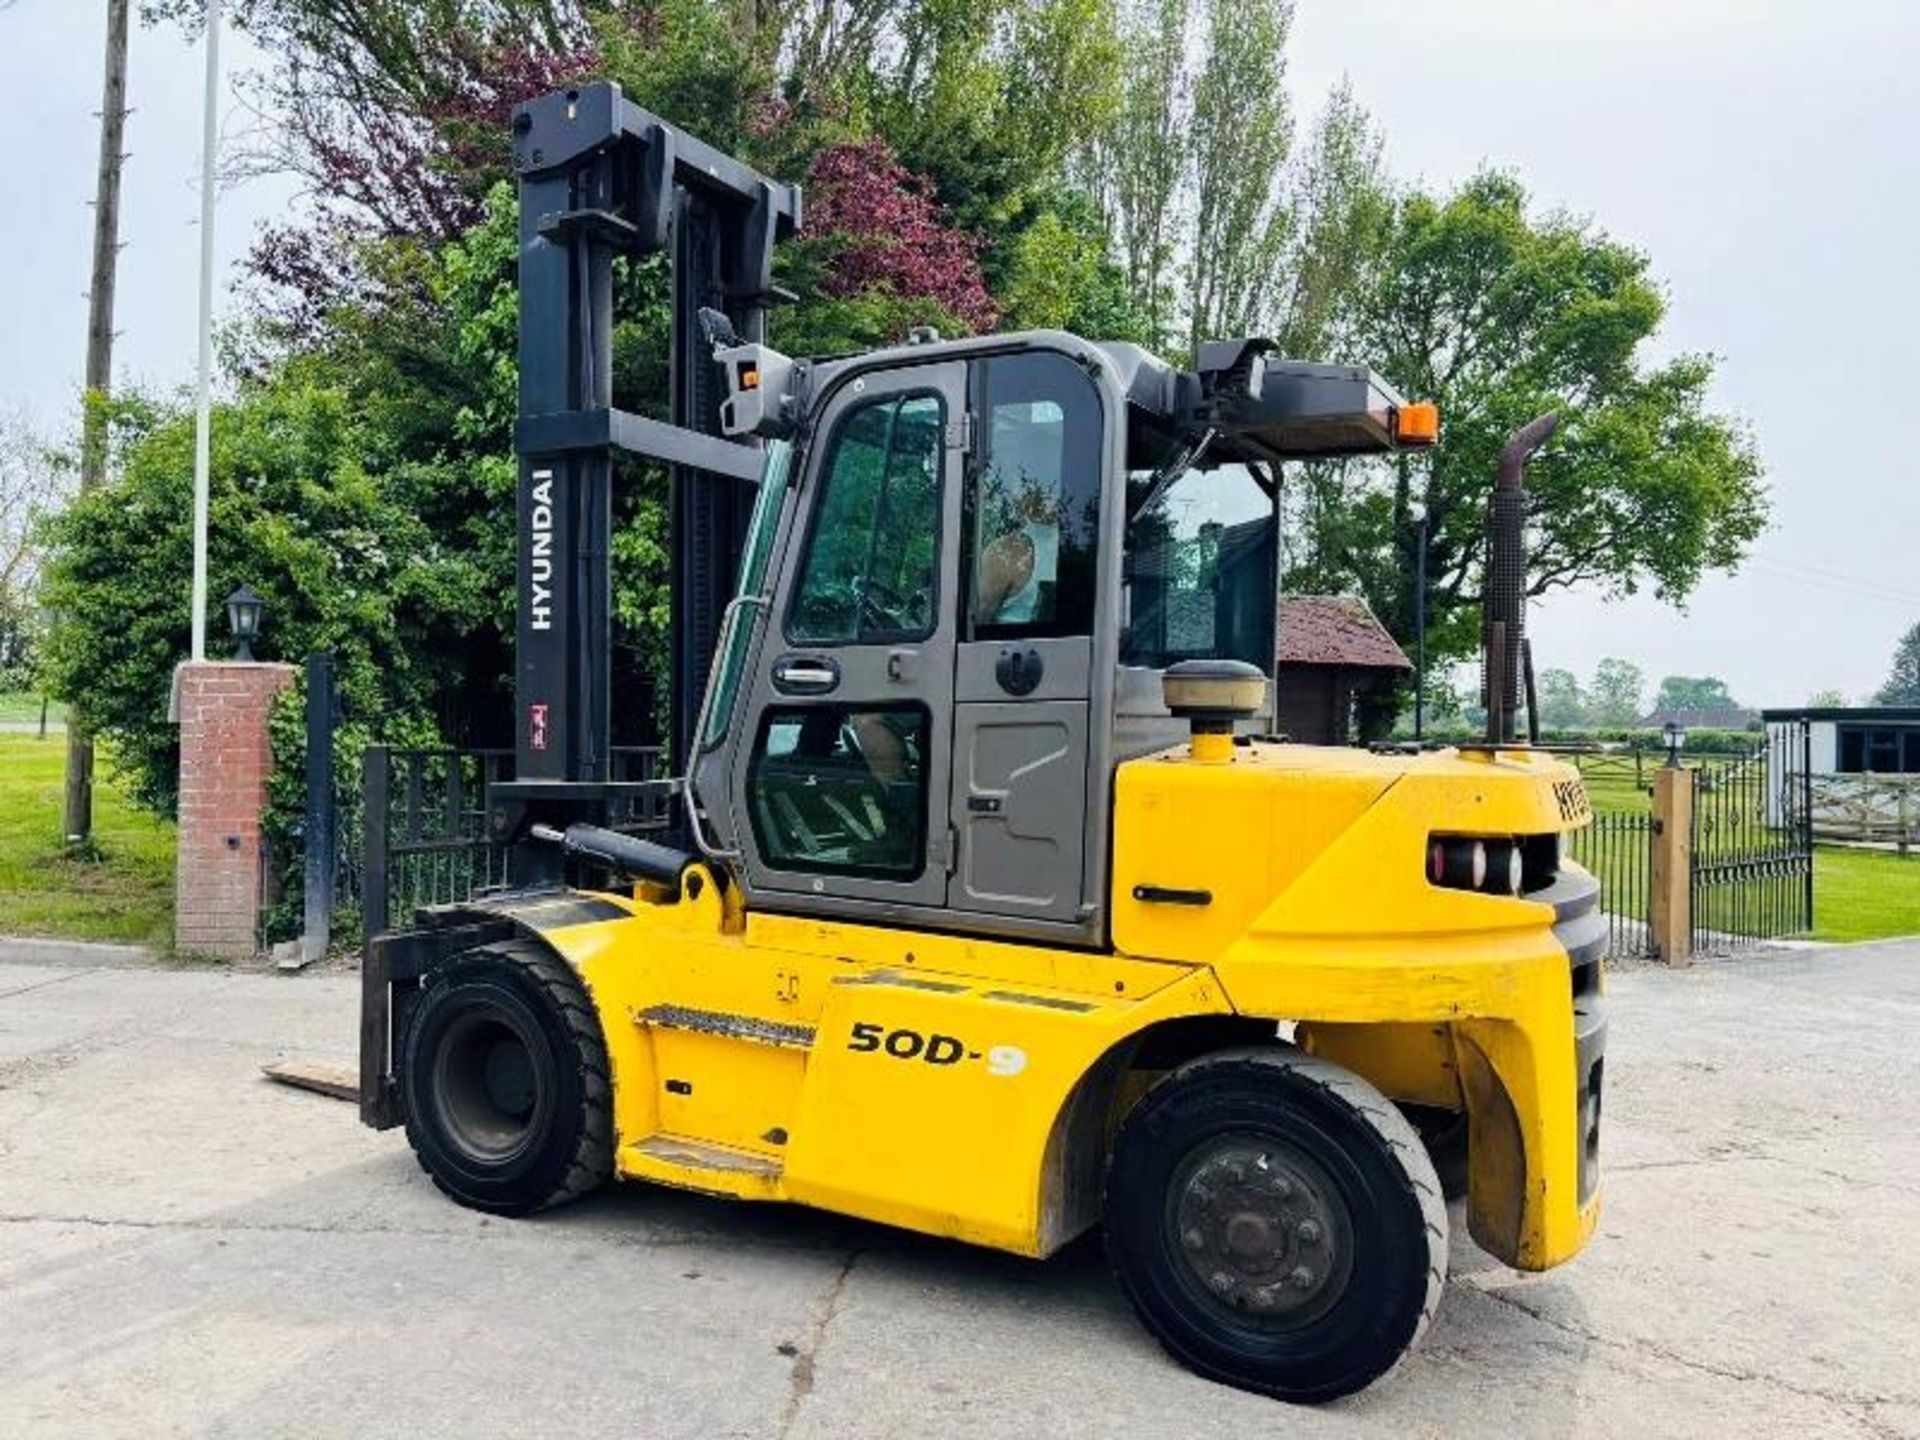 HYUNDAI 50D-9 DIESEL FORKLIFT *YEAR 2016, 5 TON LIFT* C/W SIDE SHIFT - Image 8 of 18